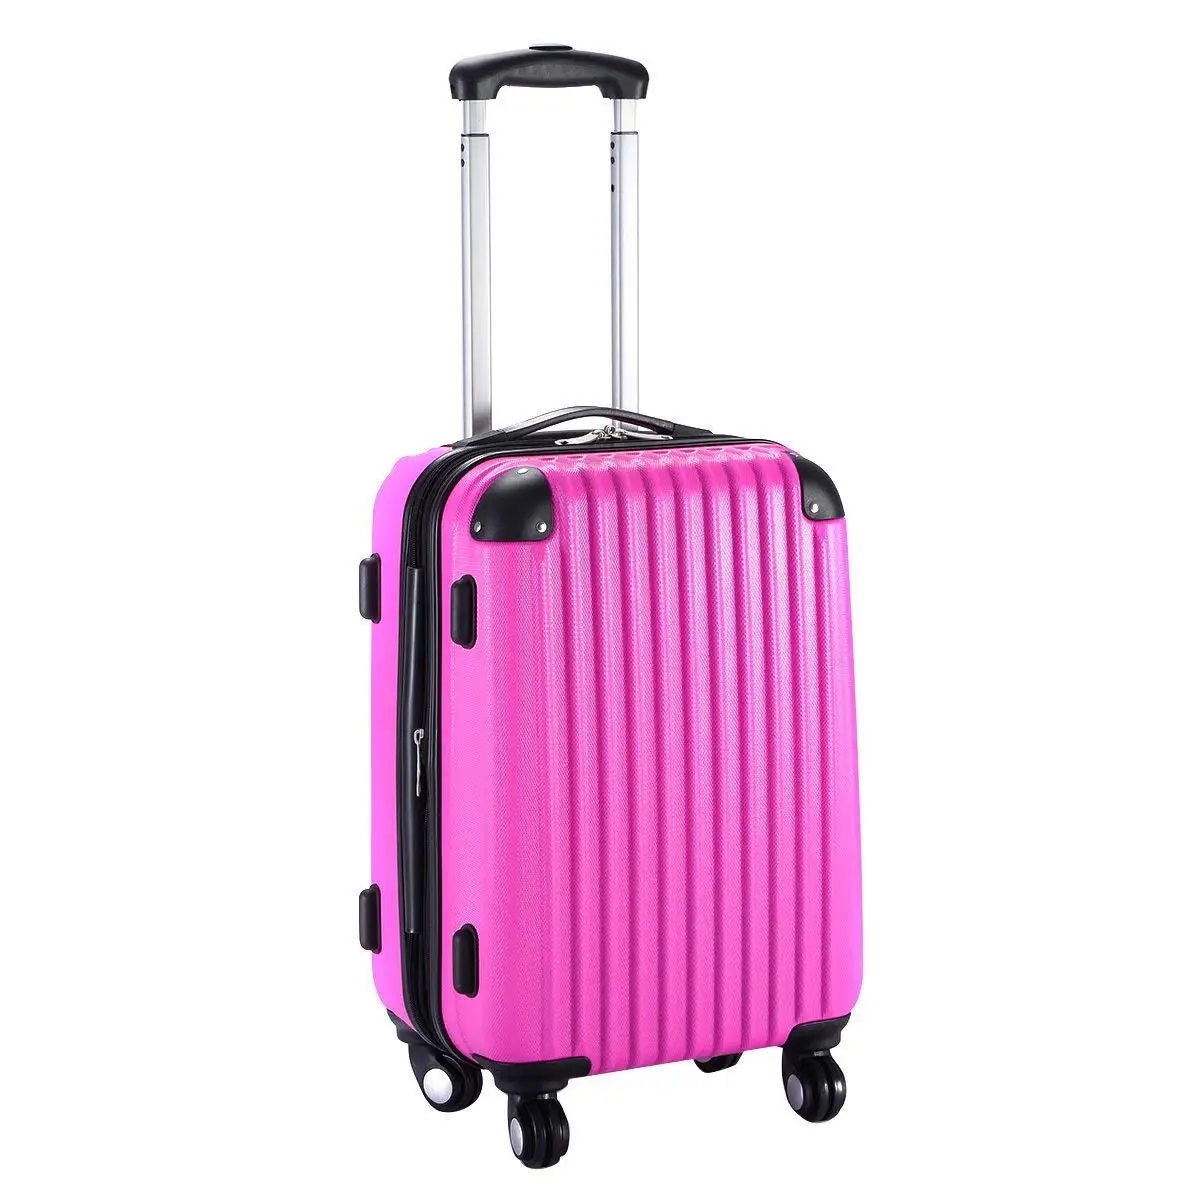 Cheap Pink Suitcase, find Pink Suitcase deals on line at Alibaba.com